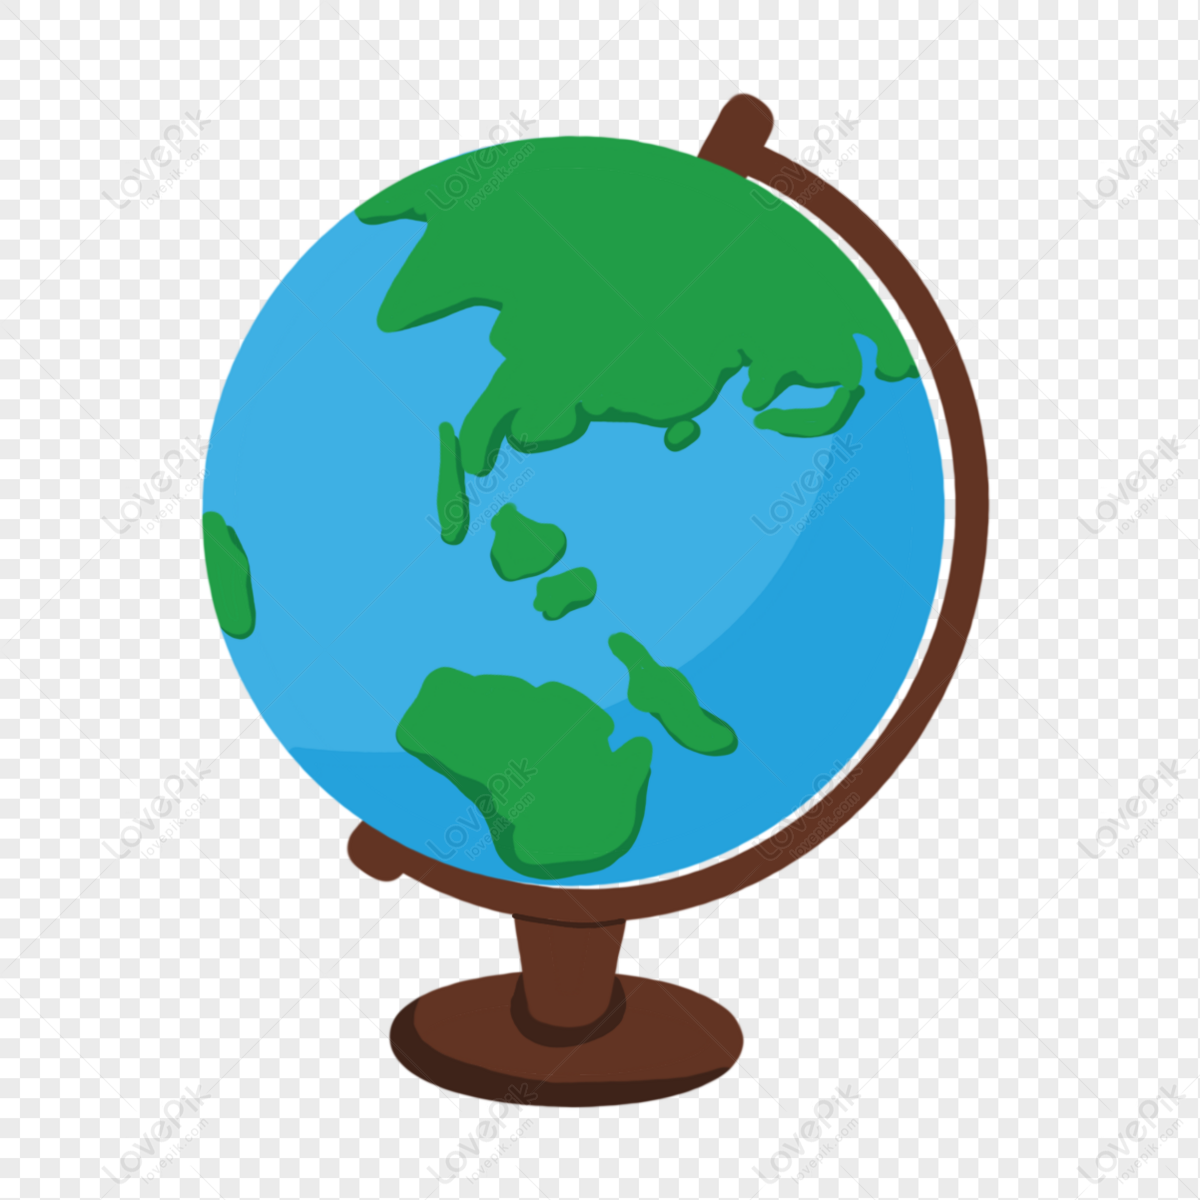 Globe PNG Transparent Background And Clipart Image For Free Download -  Lovepik | 401369410